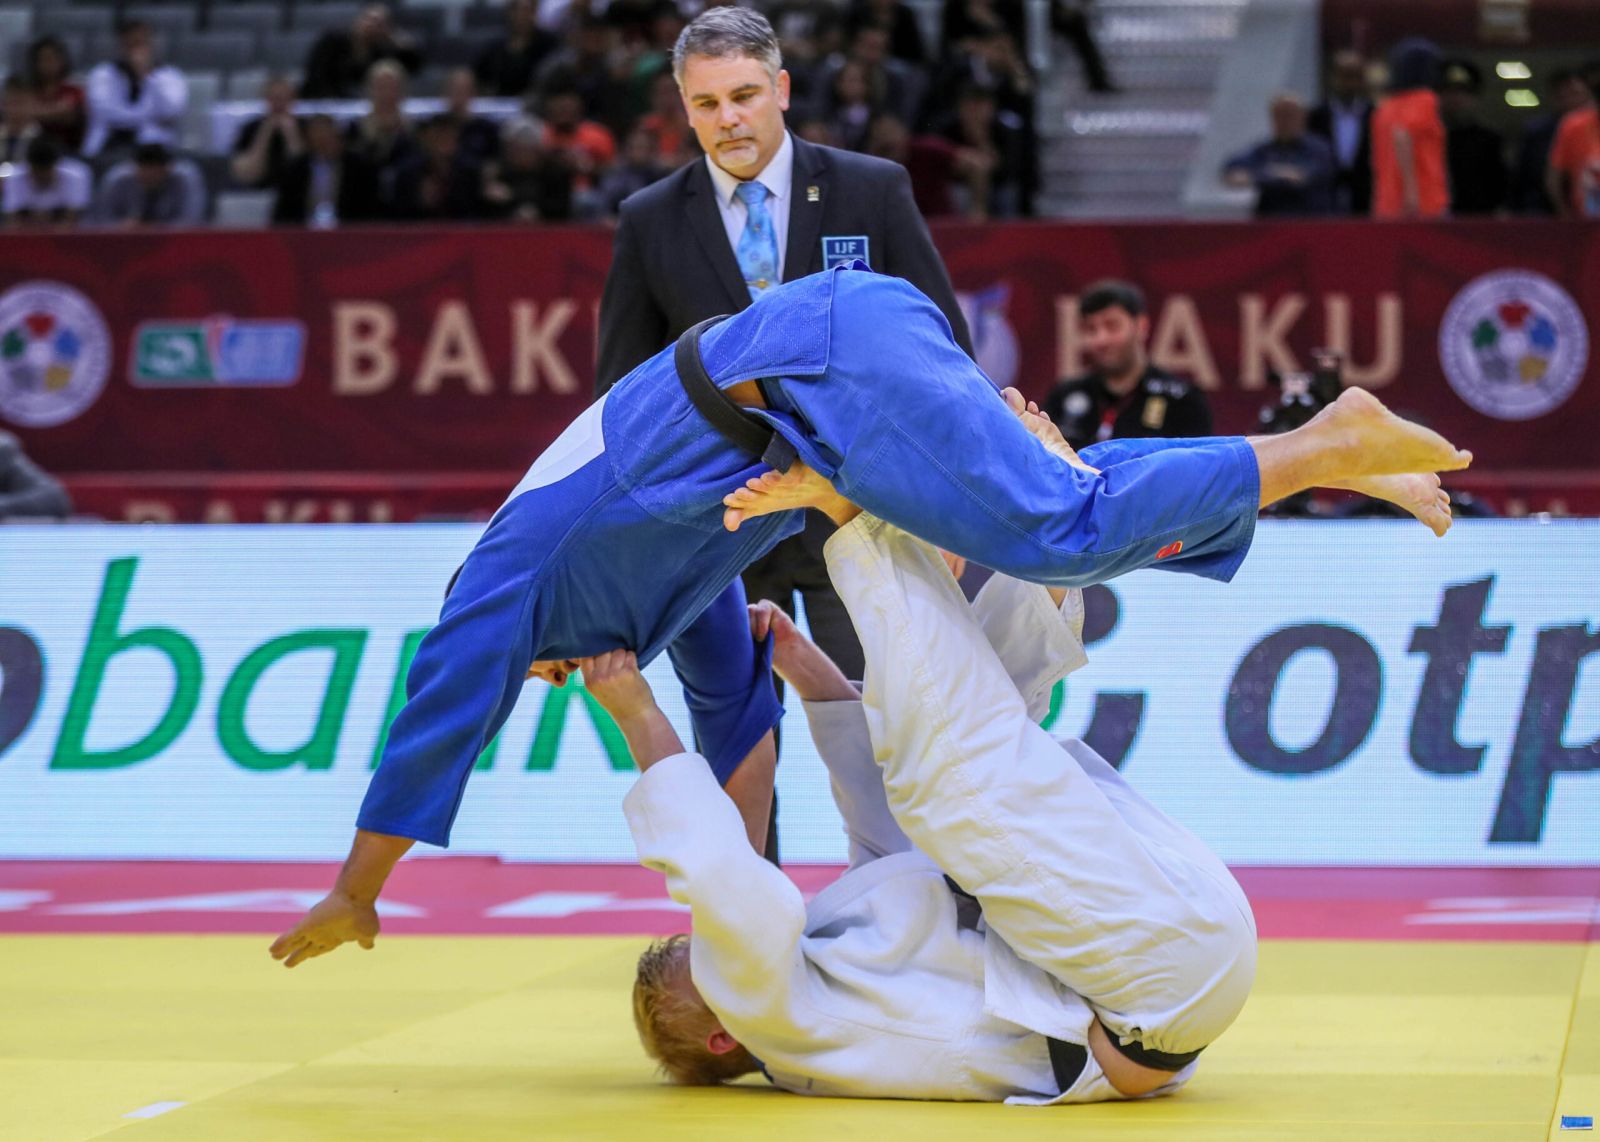 THE INTERNATIONAL BLIND SPORTS FEDERATION HAS PUBLISHED A CALENDAR OF PARA JUDO COMPETITIONS FOR 2022